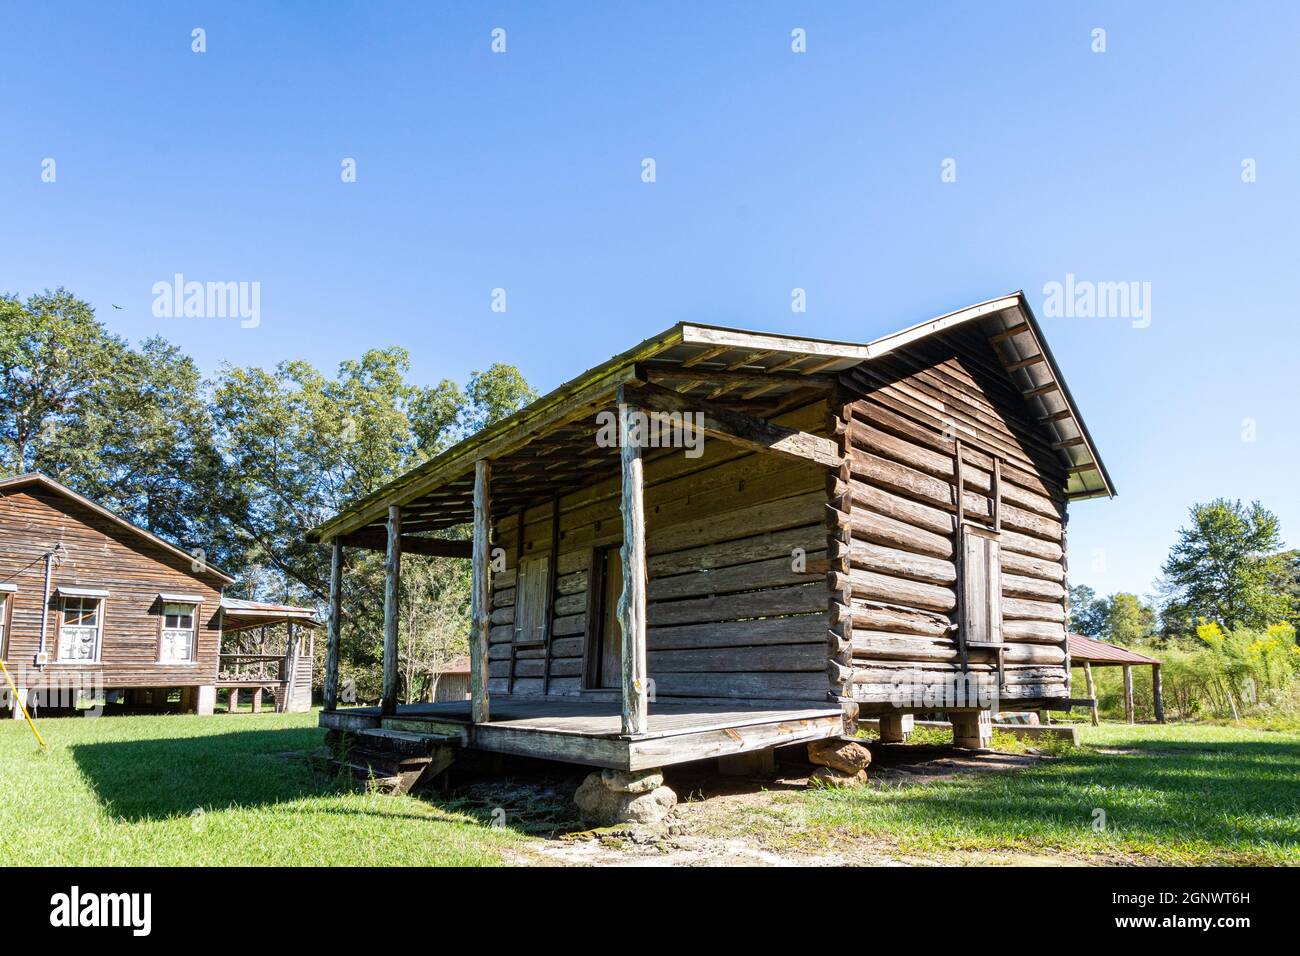 Luverne, Alabama, USA - Sept. 24, 2021: A log cabin found at the Crenshaw County Historical Society Museum in rural Crenshaw County. Stock Photo